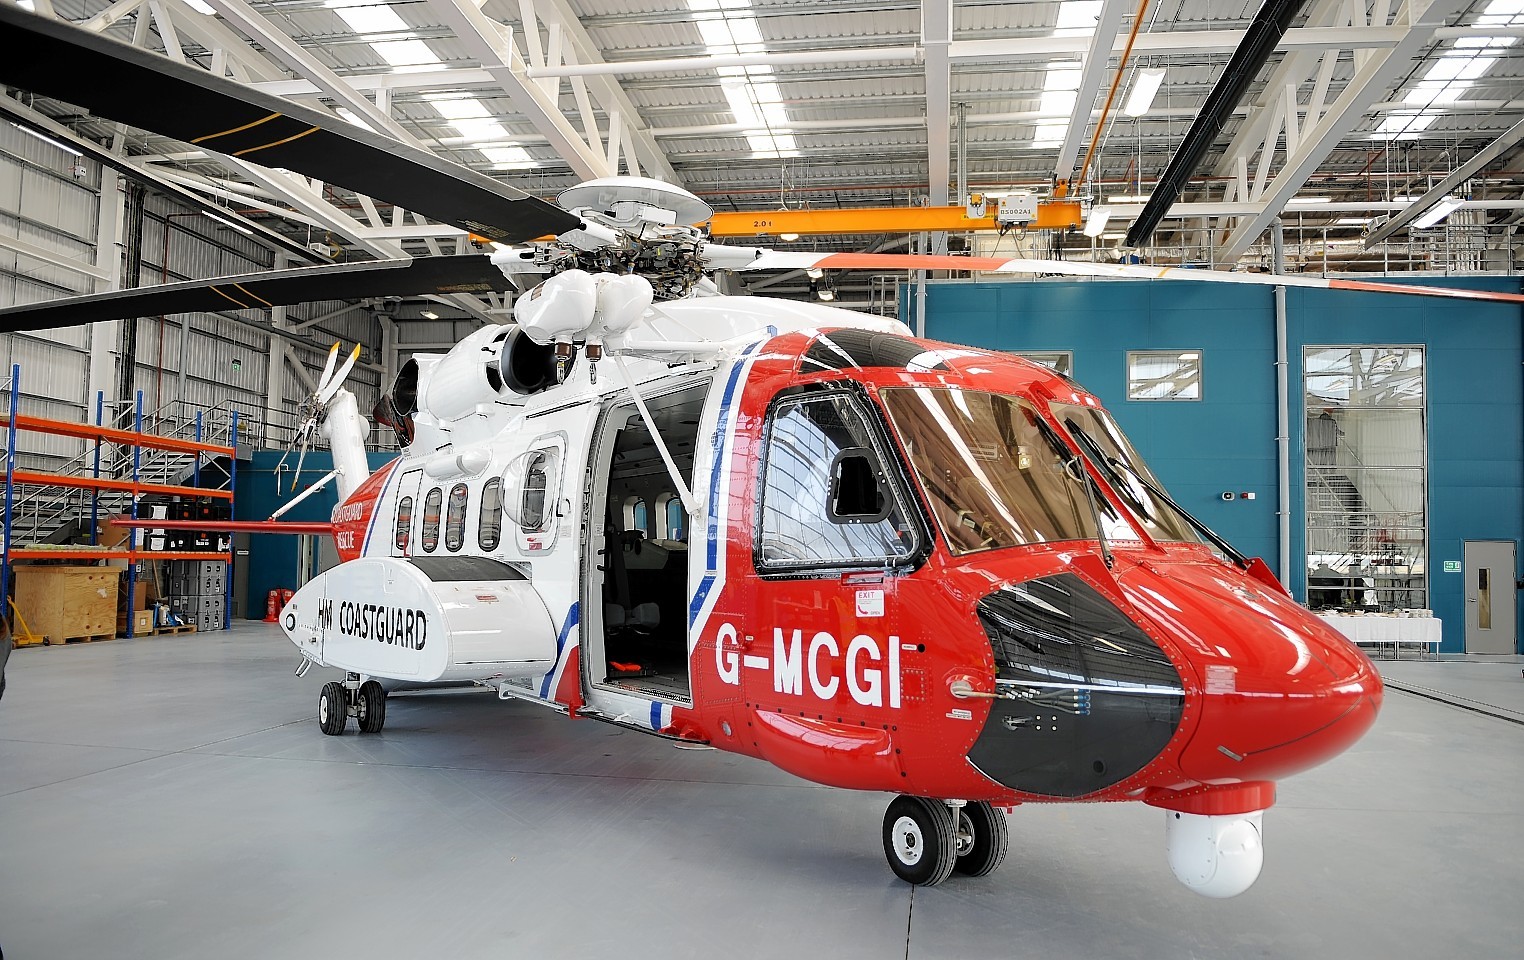 One of the new Sikorsky helicopter which will be based at Inverness